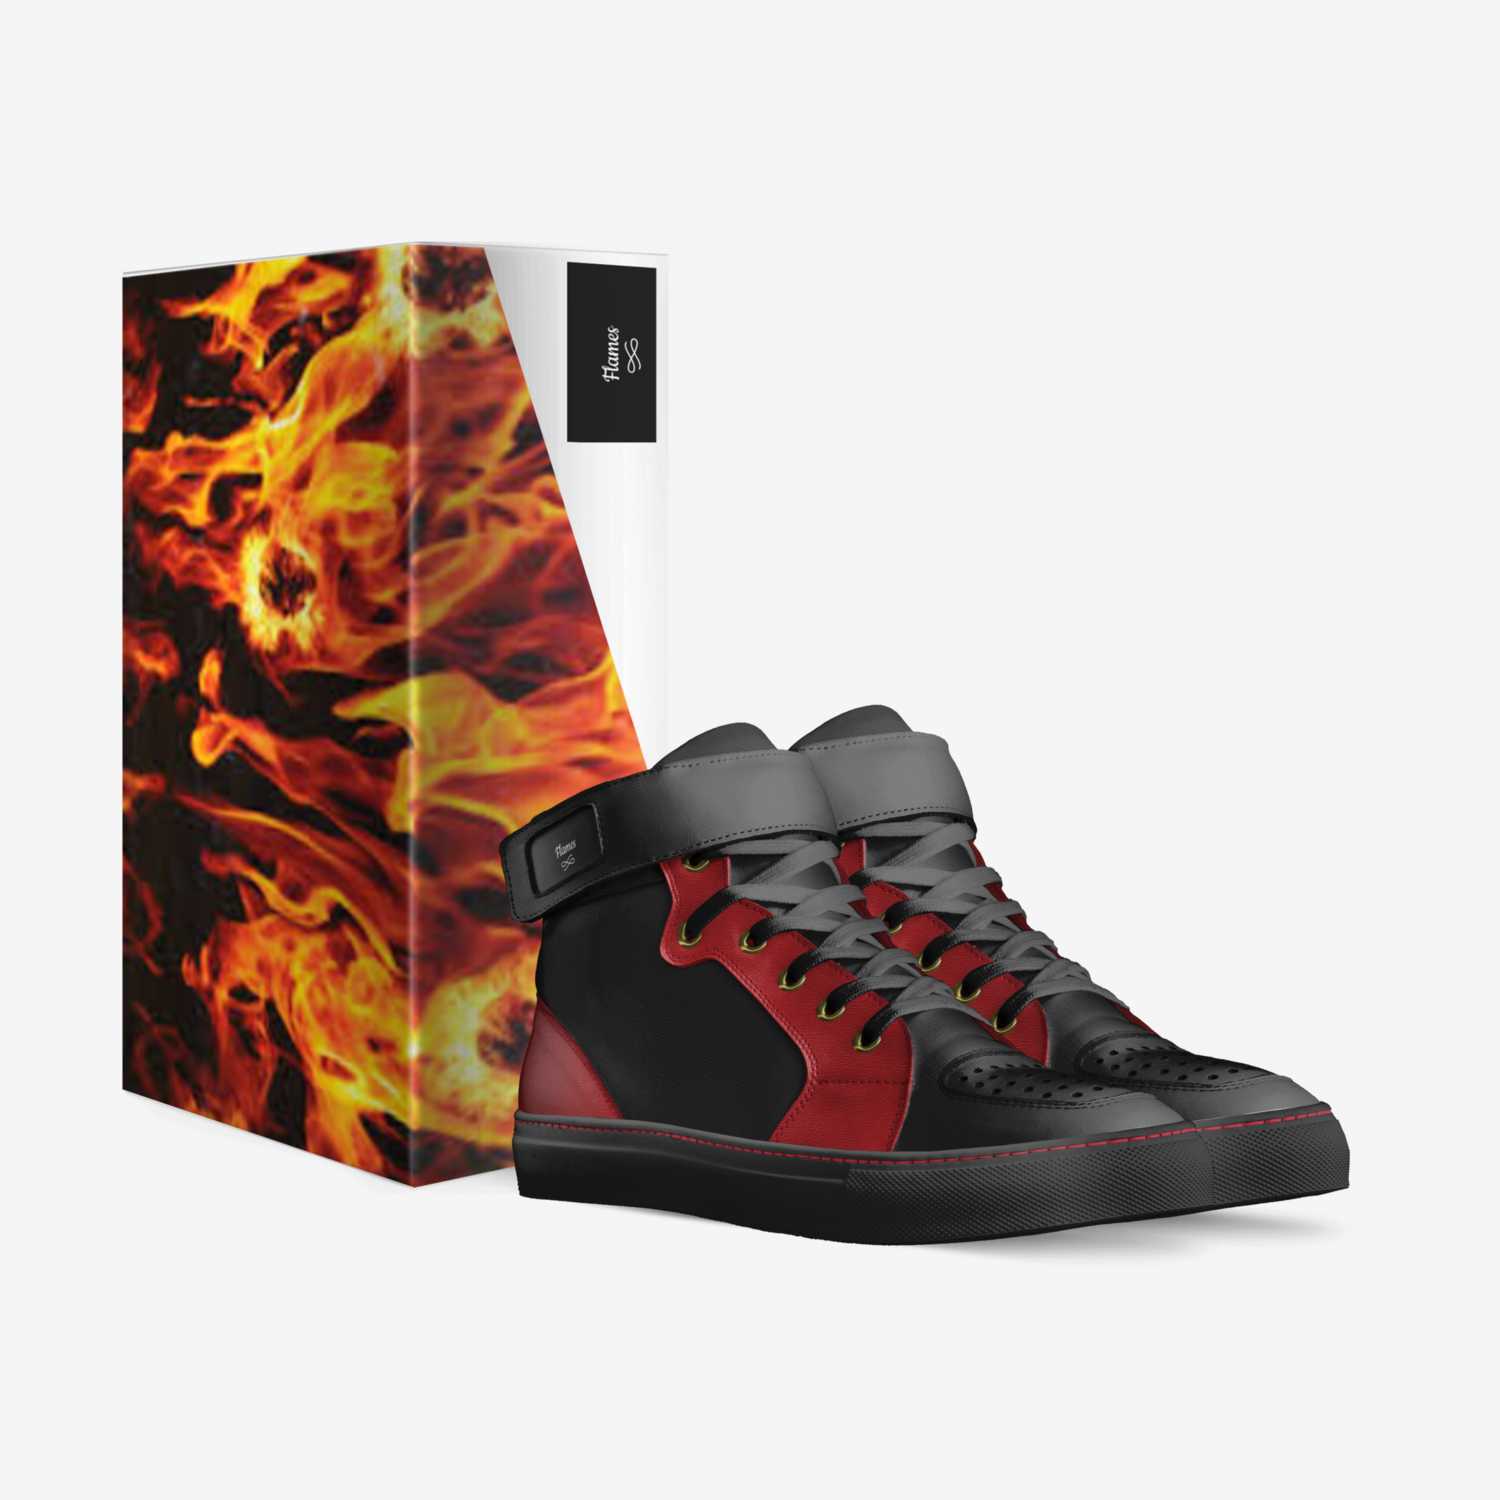 Flames custom made in Italy shoes by Oliver Goulding-smith | Box view